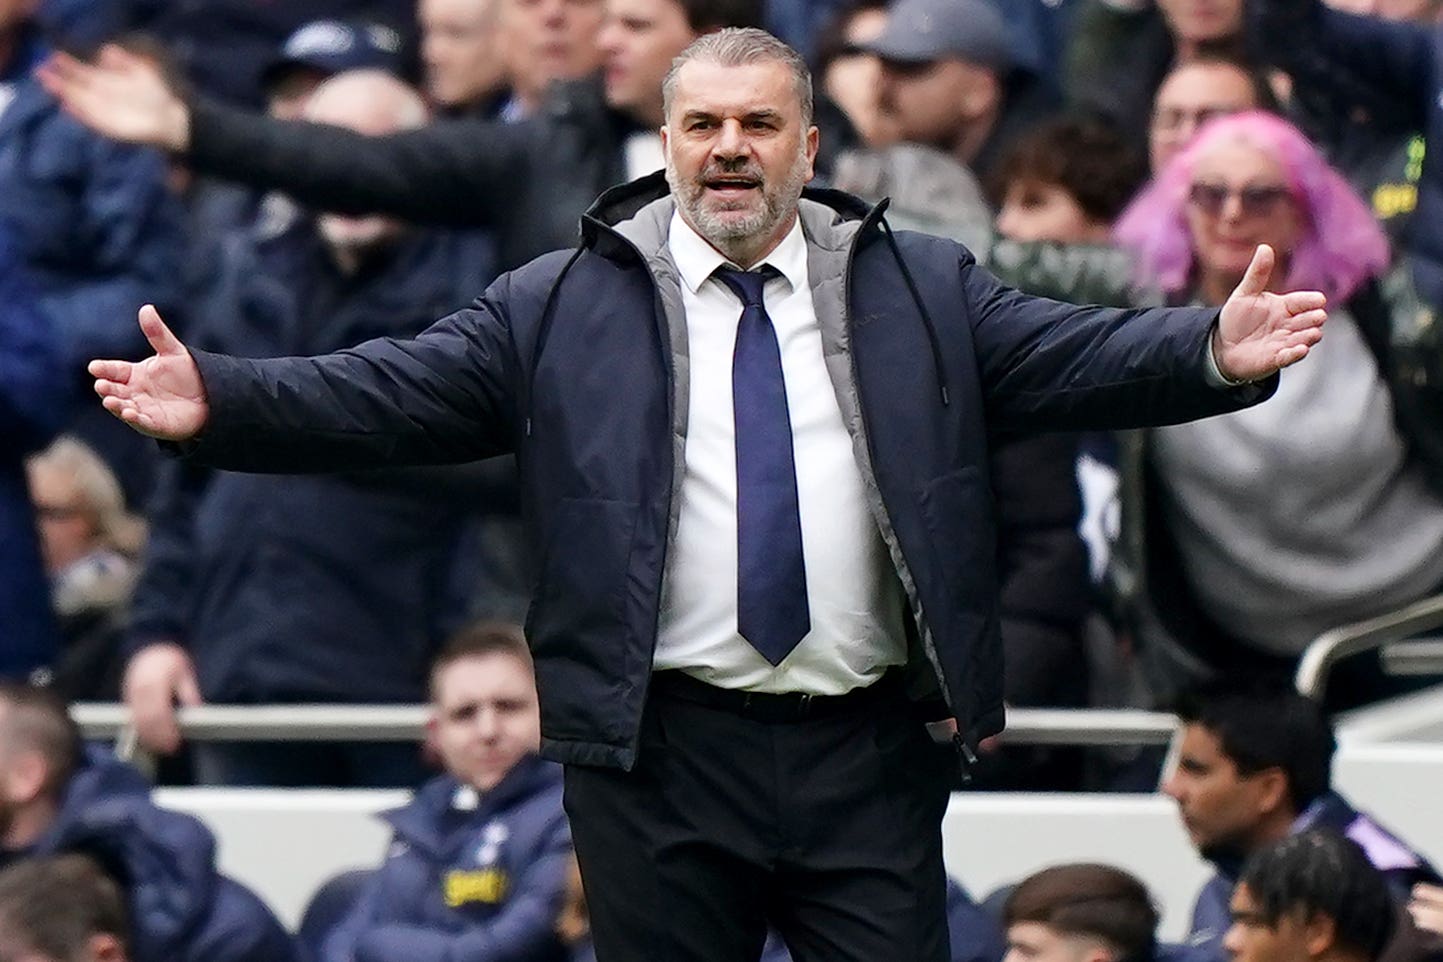 Postecoglou had been baffled all week by suggestions Spurs would deliberately lose to Man City to avoid handing Arsenal the title